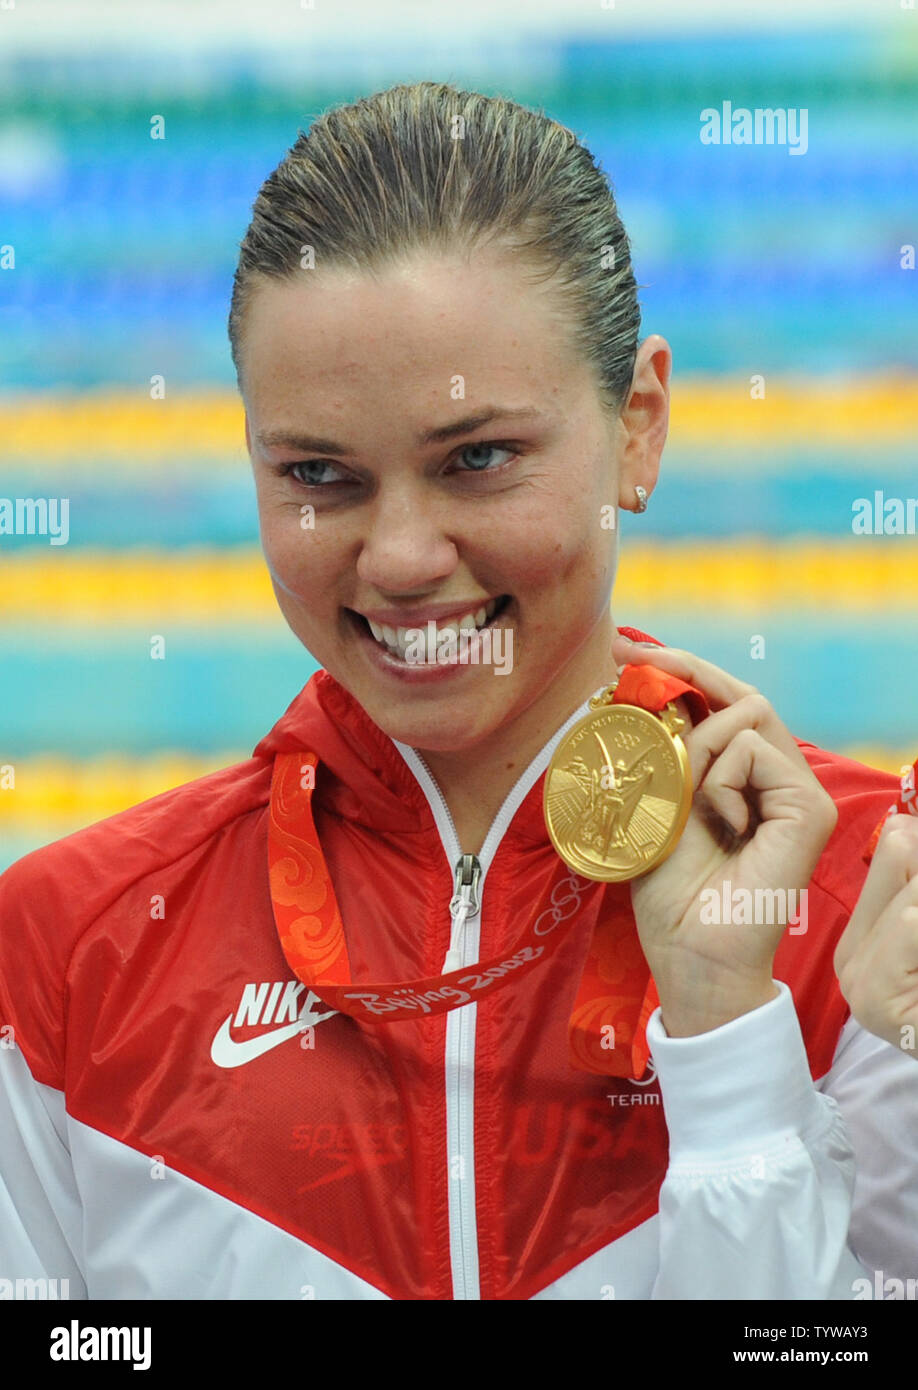 USA's gold medal winner Natalie Coughlin shows her medal after the awards ceremony for the Women's 100M Backstroke at the National Aquatics Center at the Summer Olympics in Beijing on August 12, 2008.  Coughlin's time was 58.96.   (UPI Photo/Pat Benic) Stock Photo